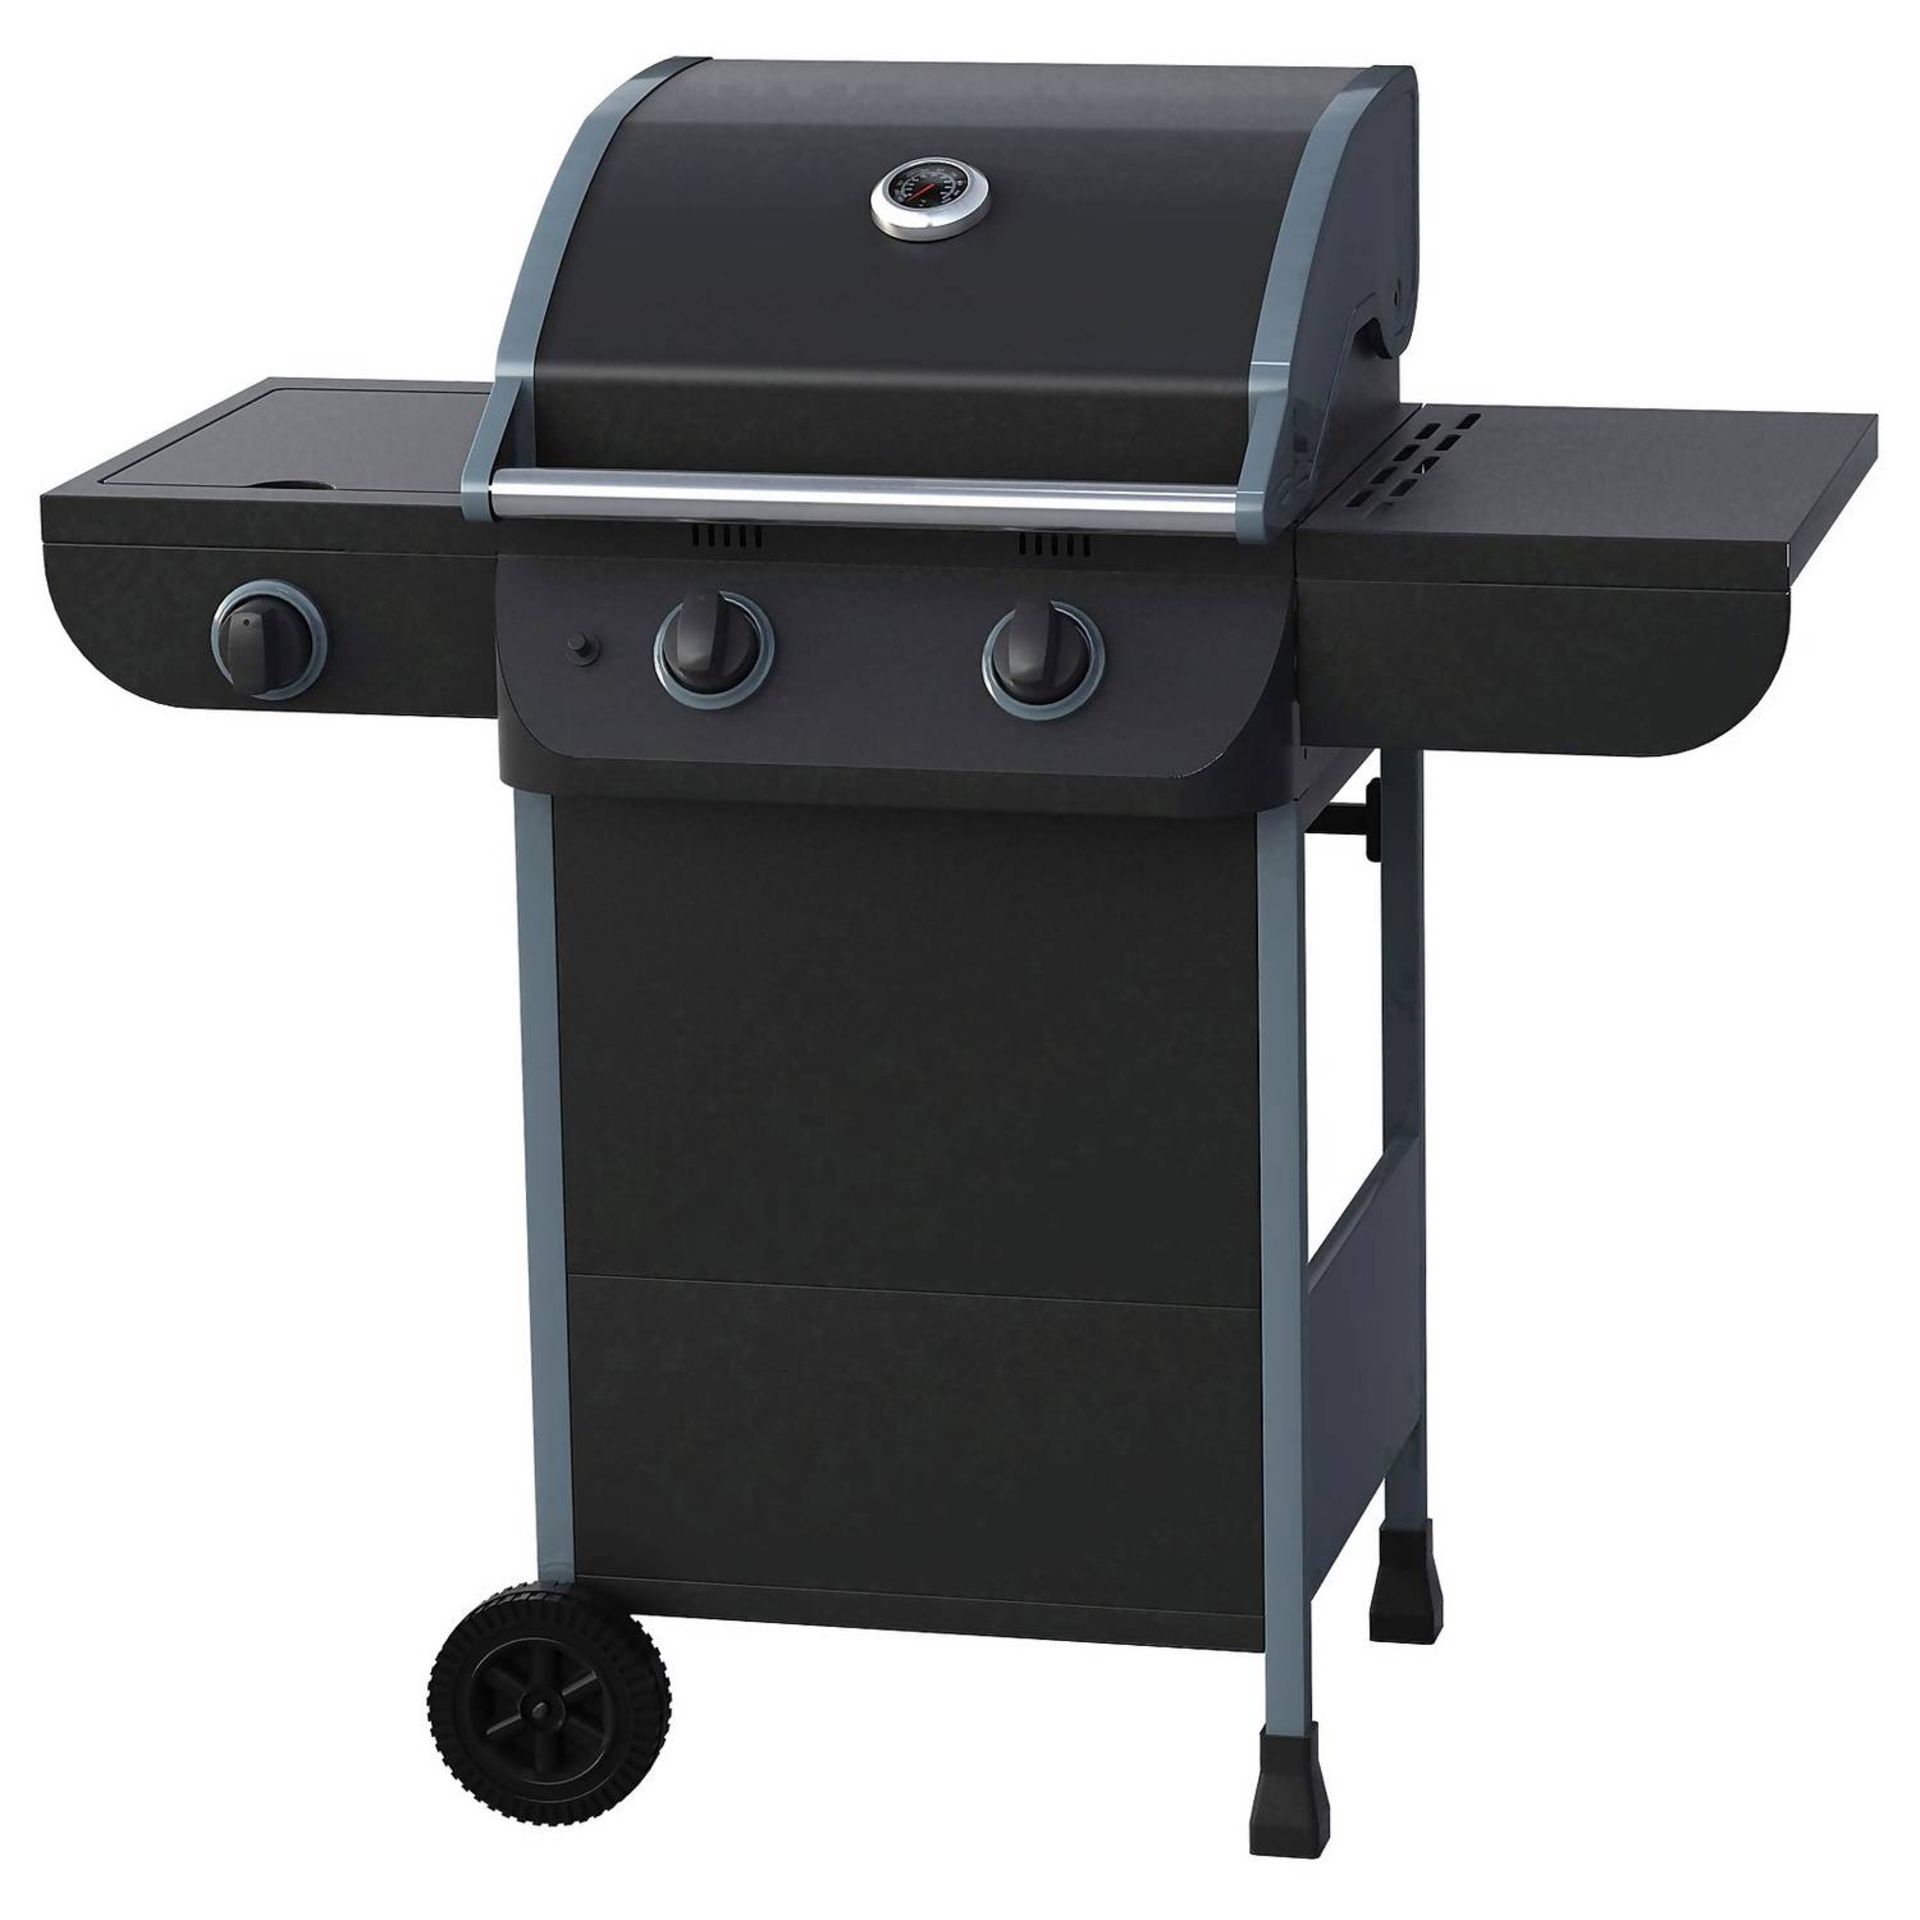 (P3) 1x Texas Nimbus 2 Burner Gas BBQ. Item Appears As New, In Original Packaging With Fixings See - Image 2 of 4